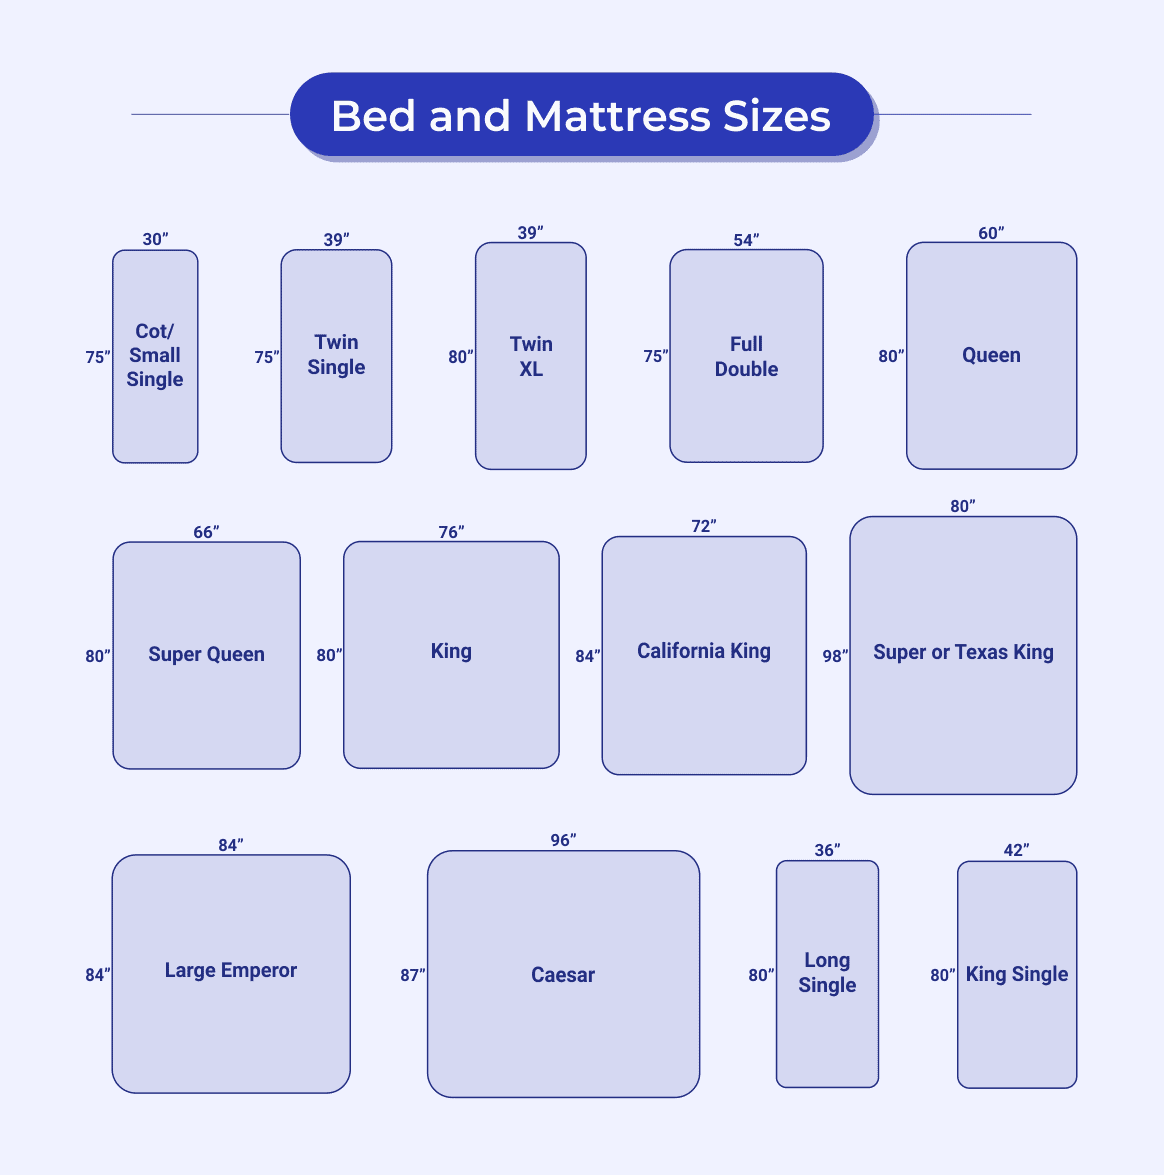 Mattress And Bed Sizes What Are The, Queen Size Bed Measurement Inches